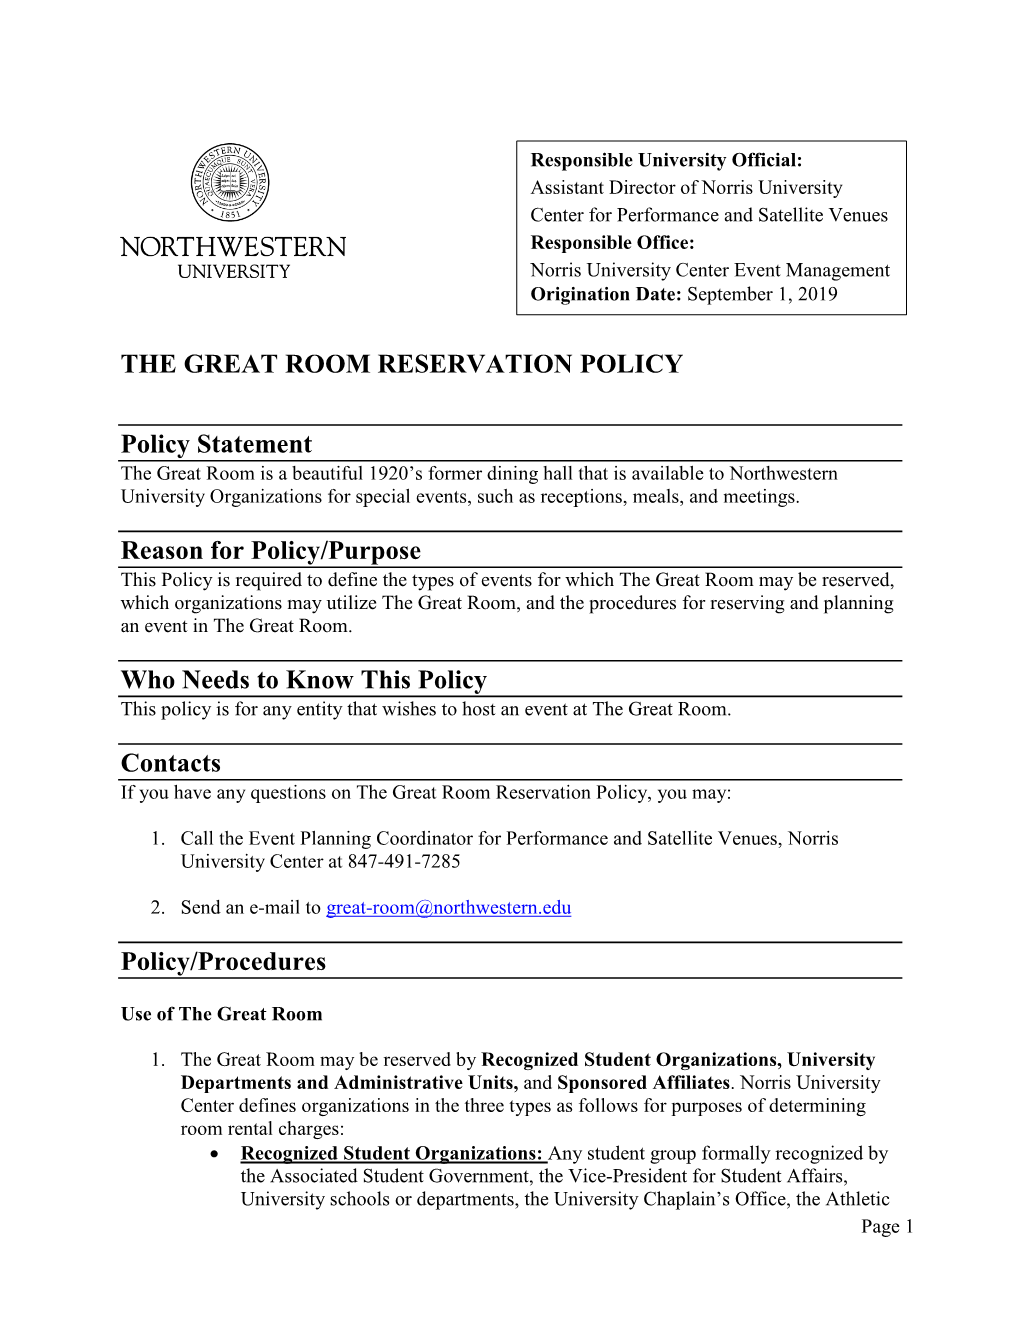 The Great Room Reservation Policy